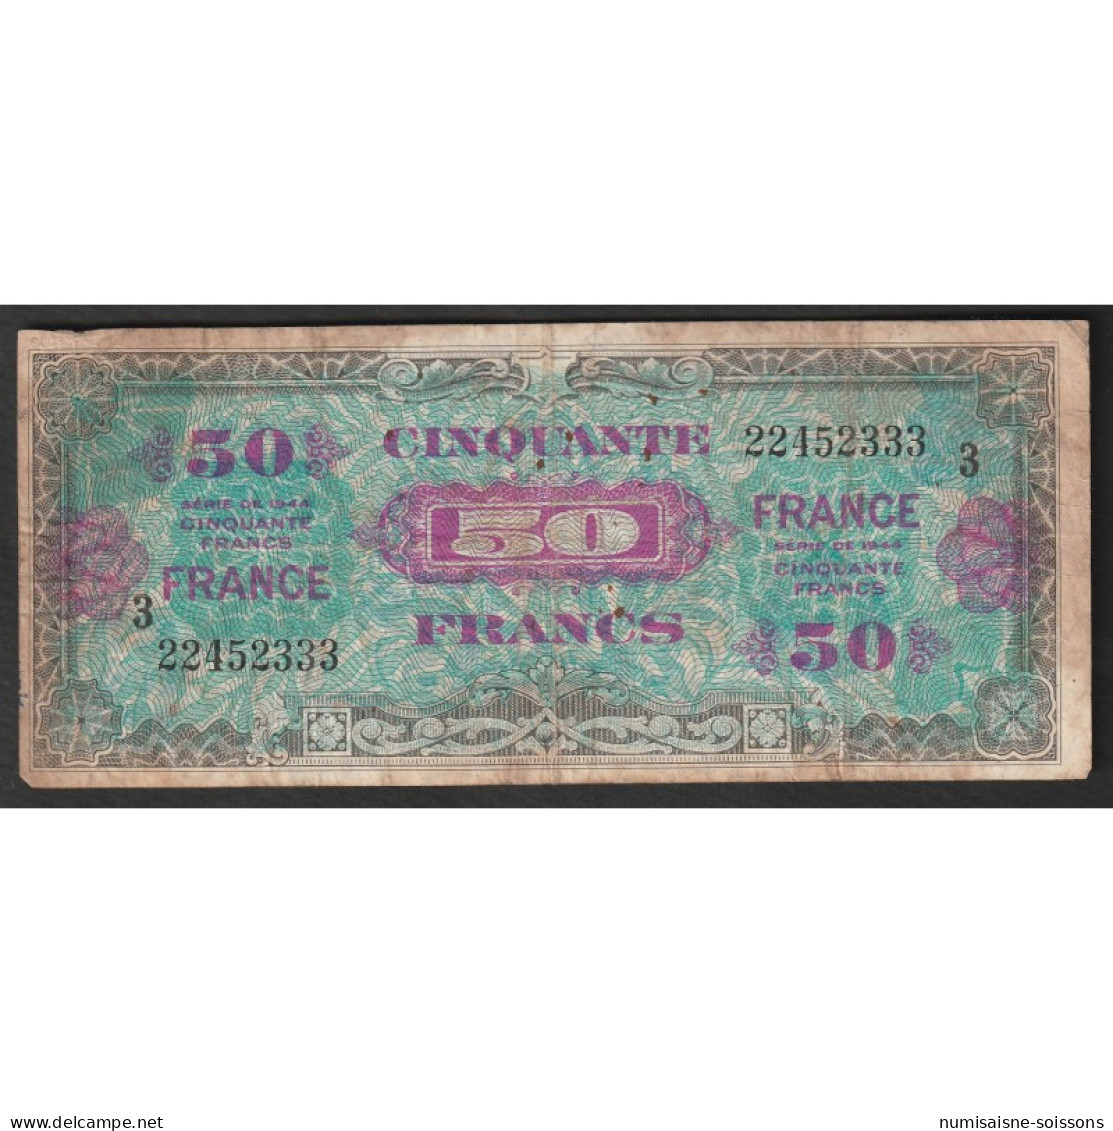 FAY VF 24/3 - 50 FRANCS VERSO FRANCE - 1945 - SERIE 3 - PICK 117a - Unclassified